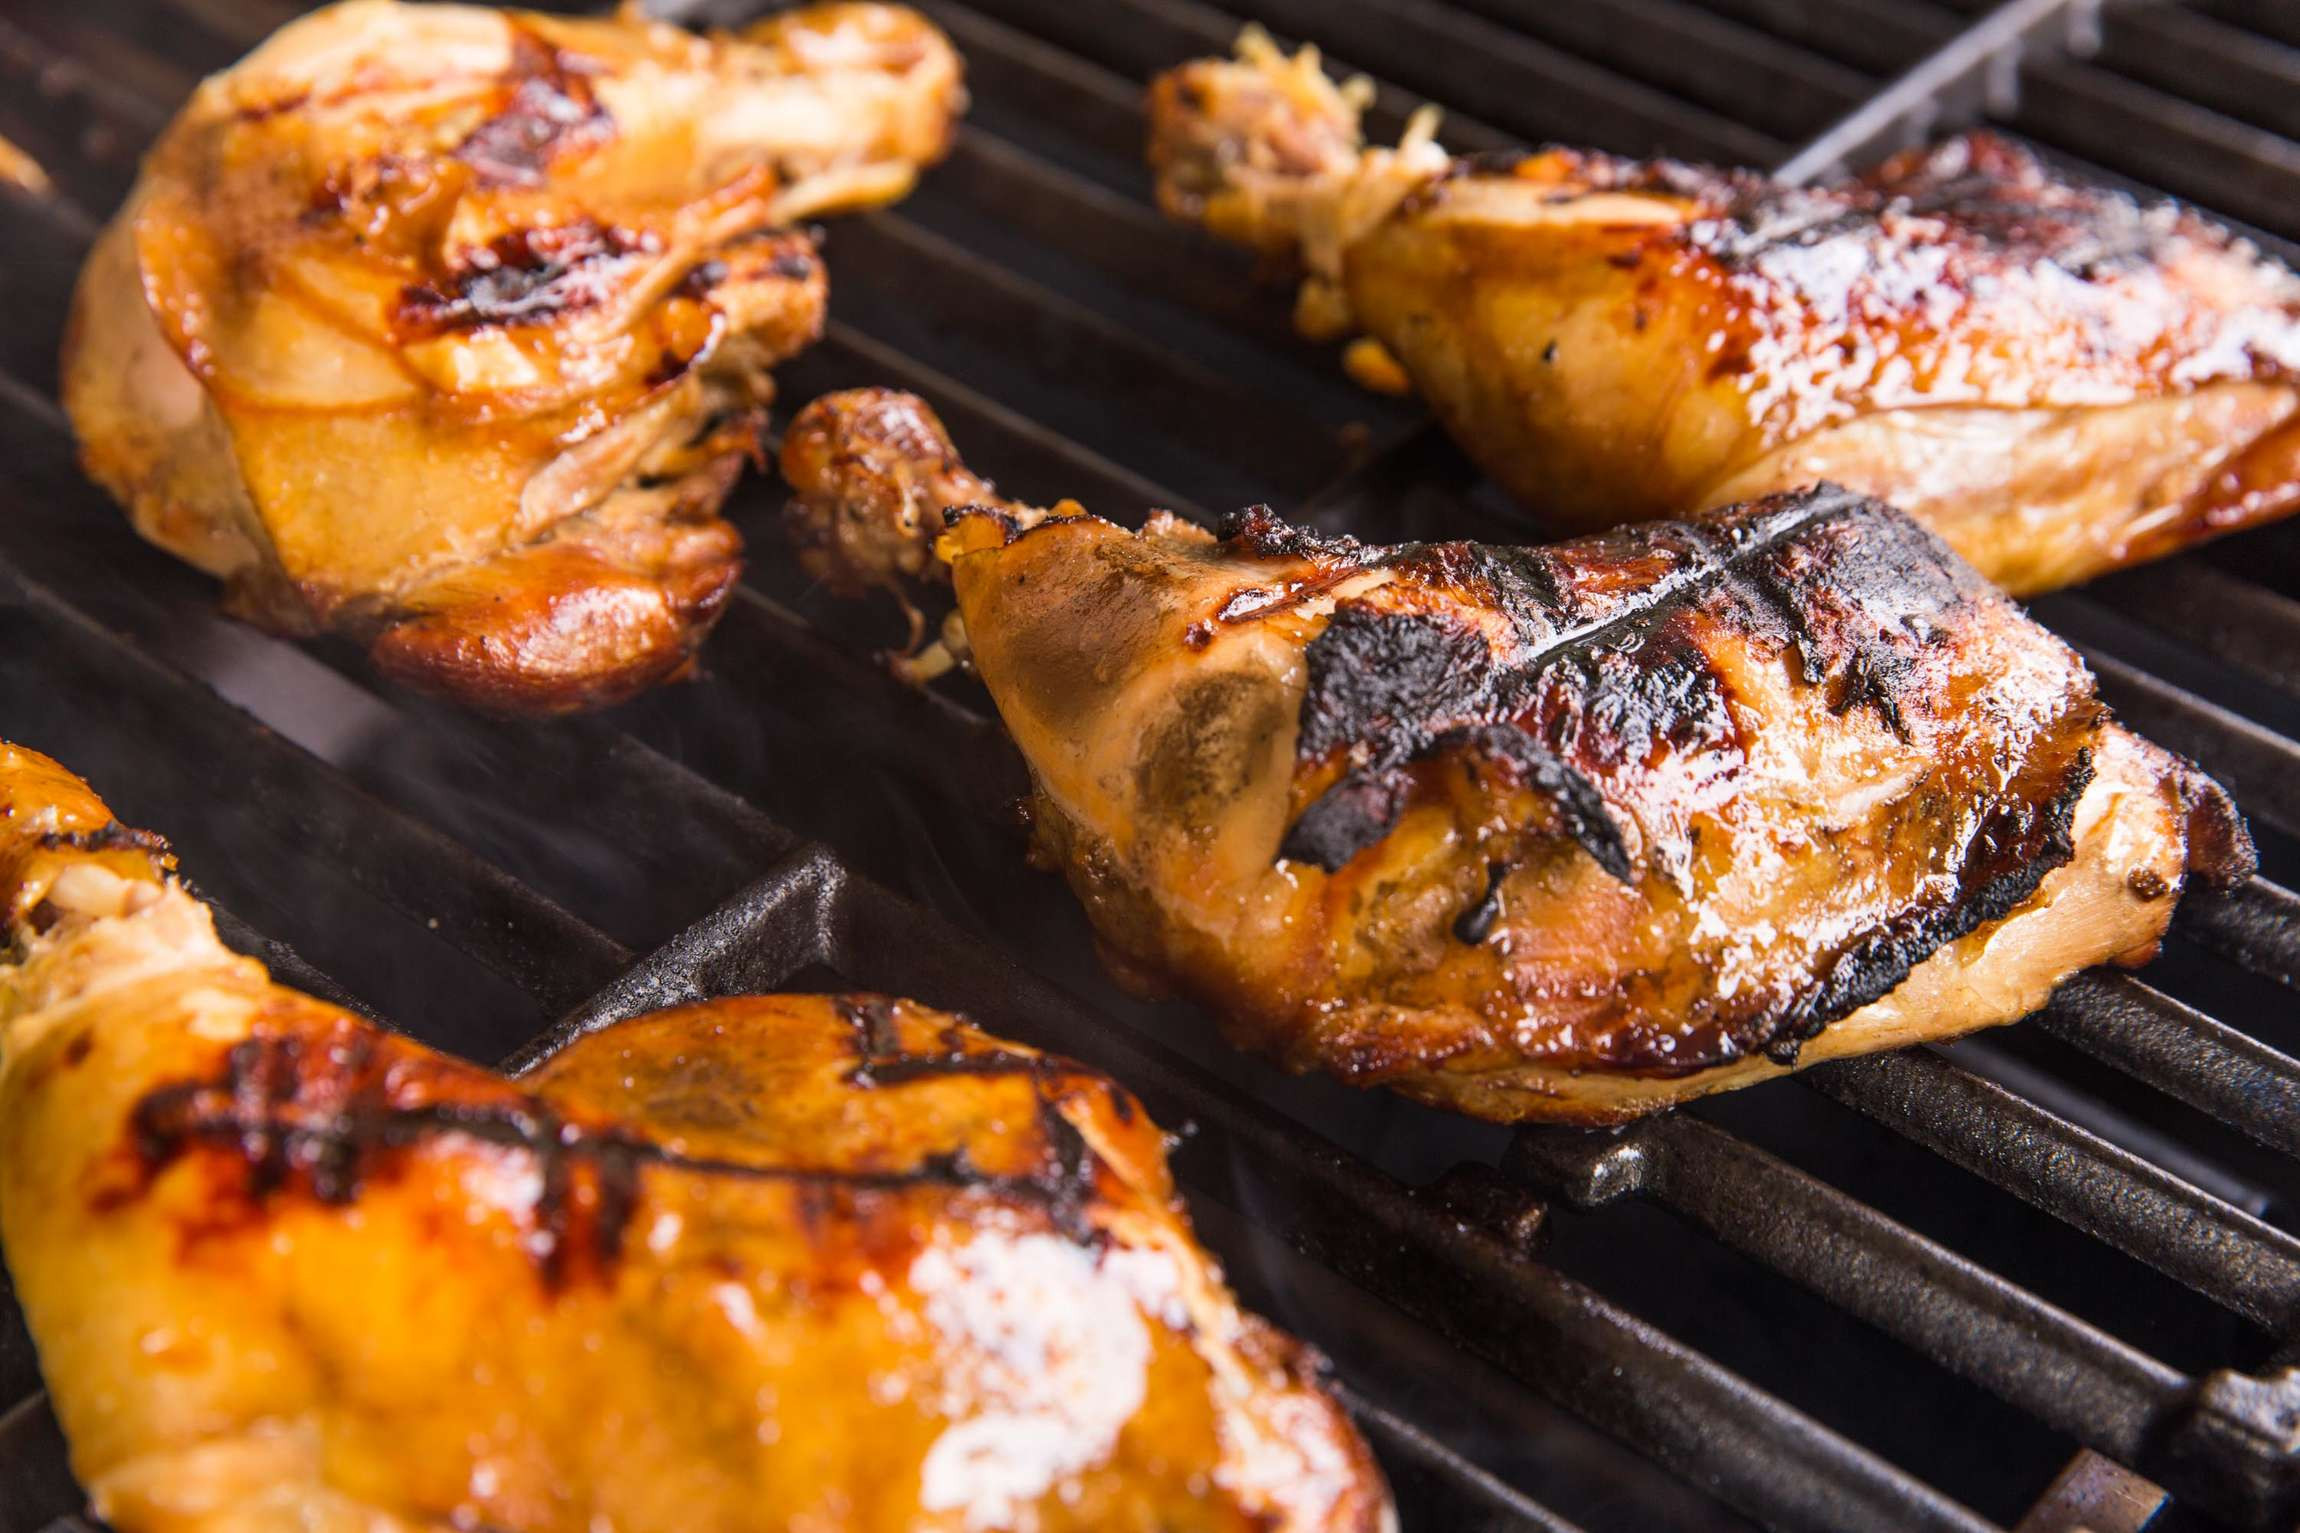 Bbq Chicken Legs On Grill
 How To Make The Perfect Grilled Chicken Legs Food Republic